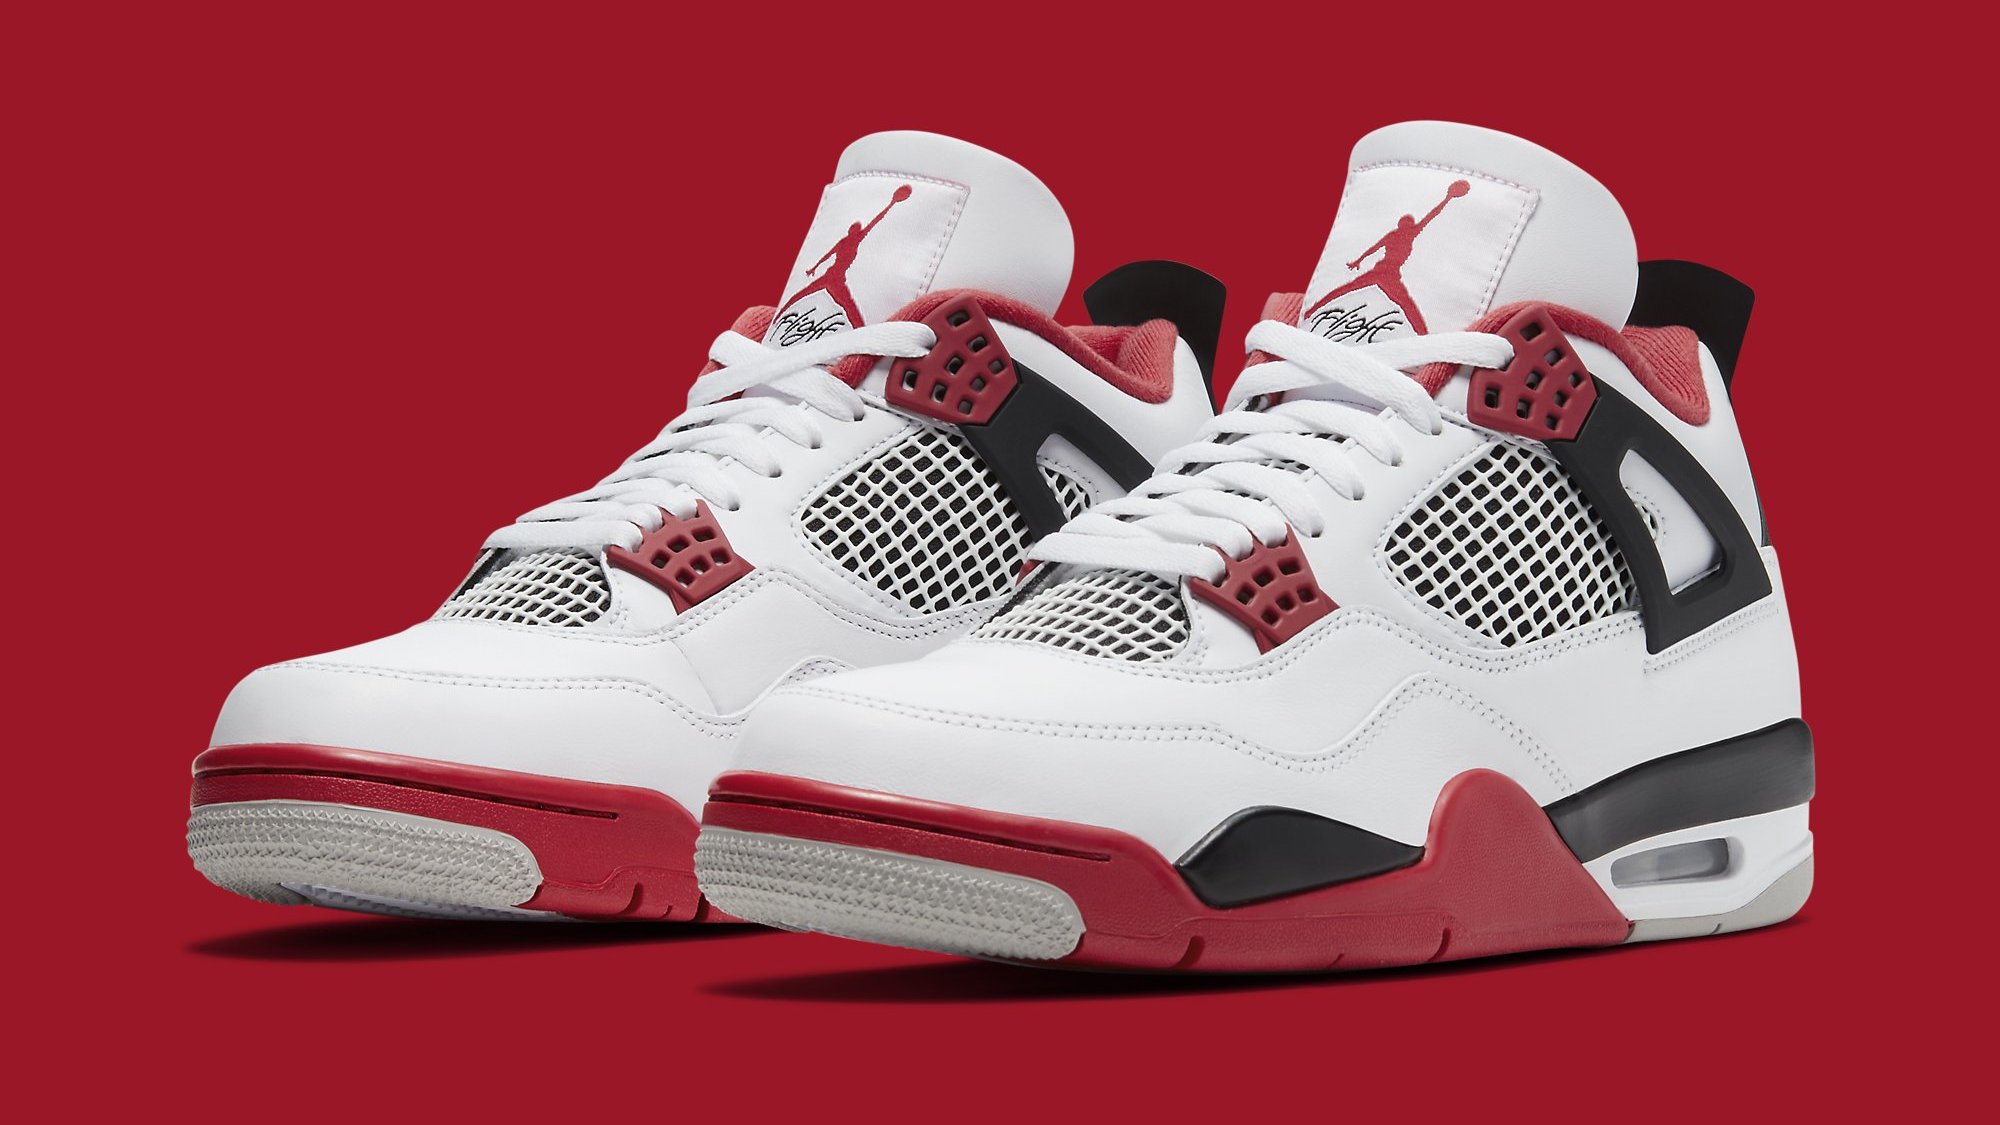 Best Look Yet at This Year's 'Fire Red' Air Jordan 4 Retro